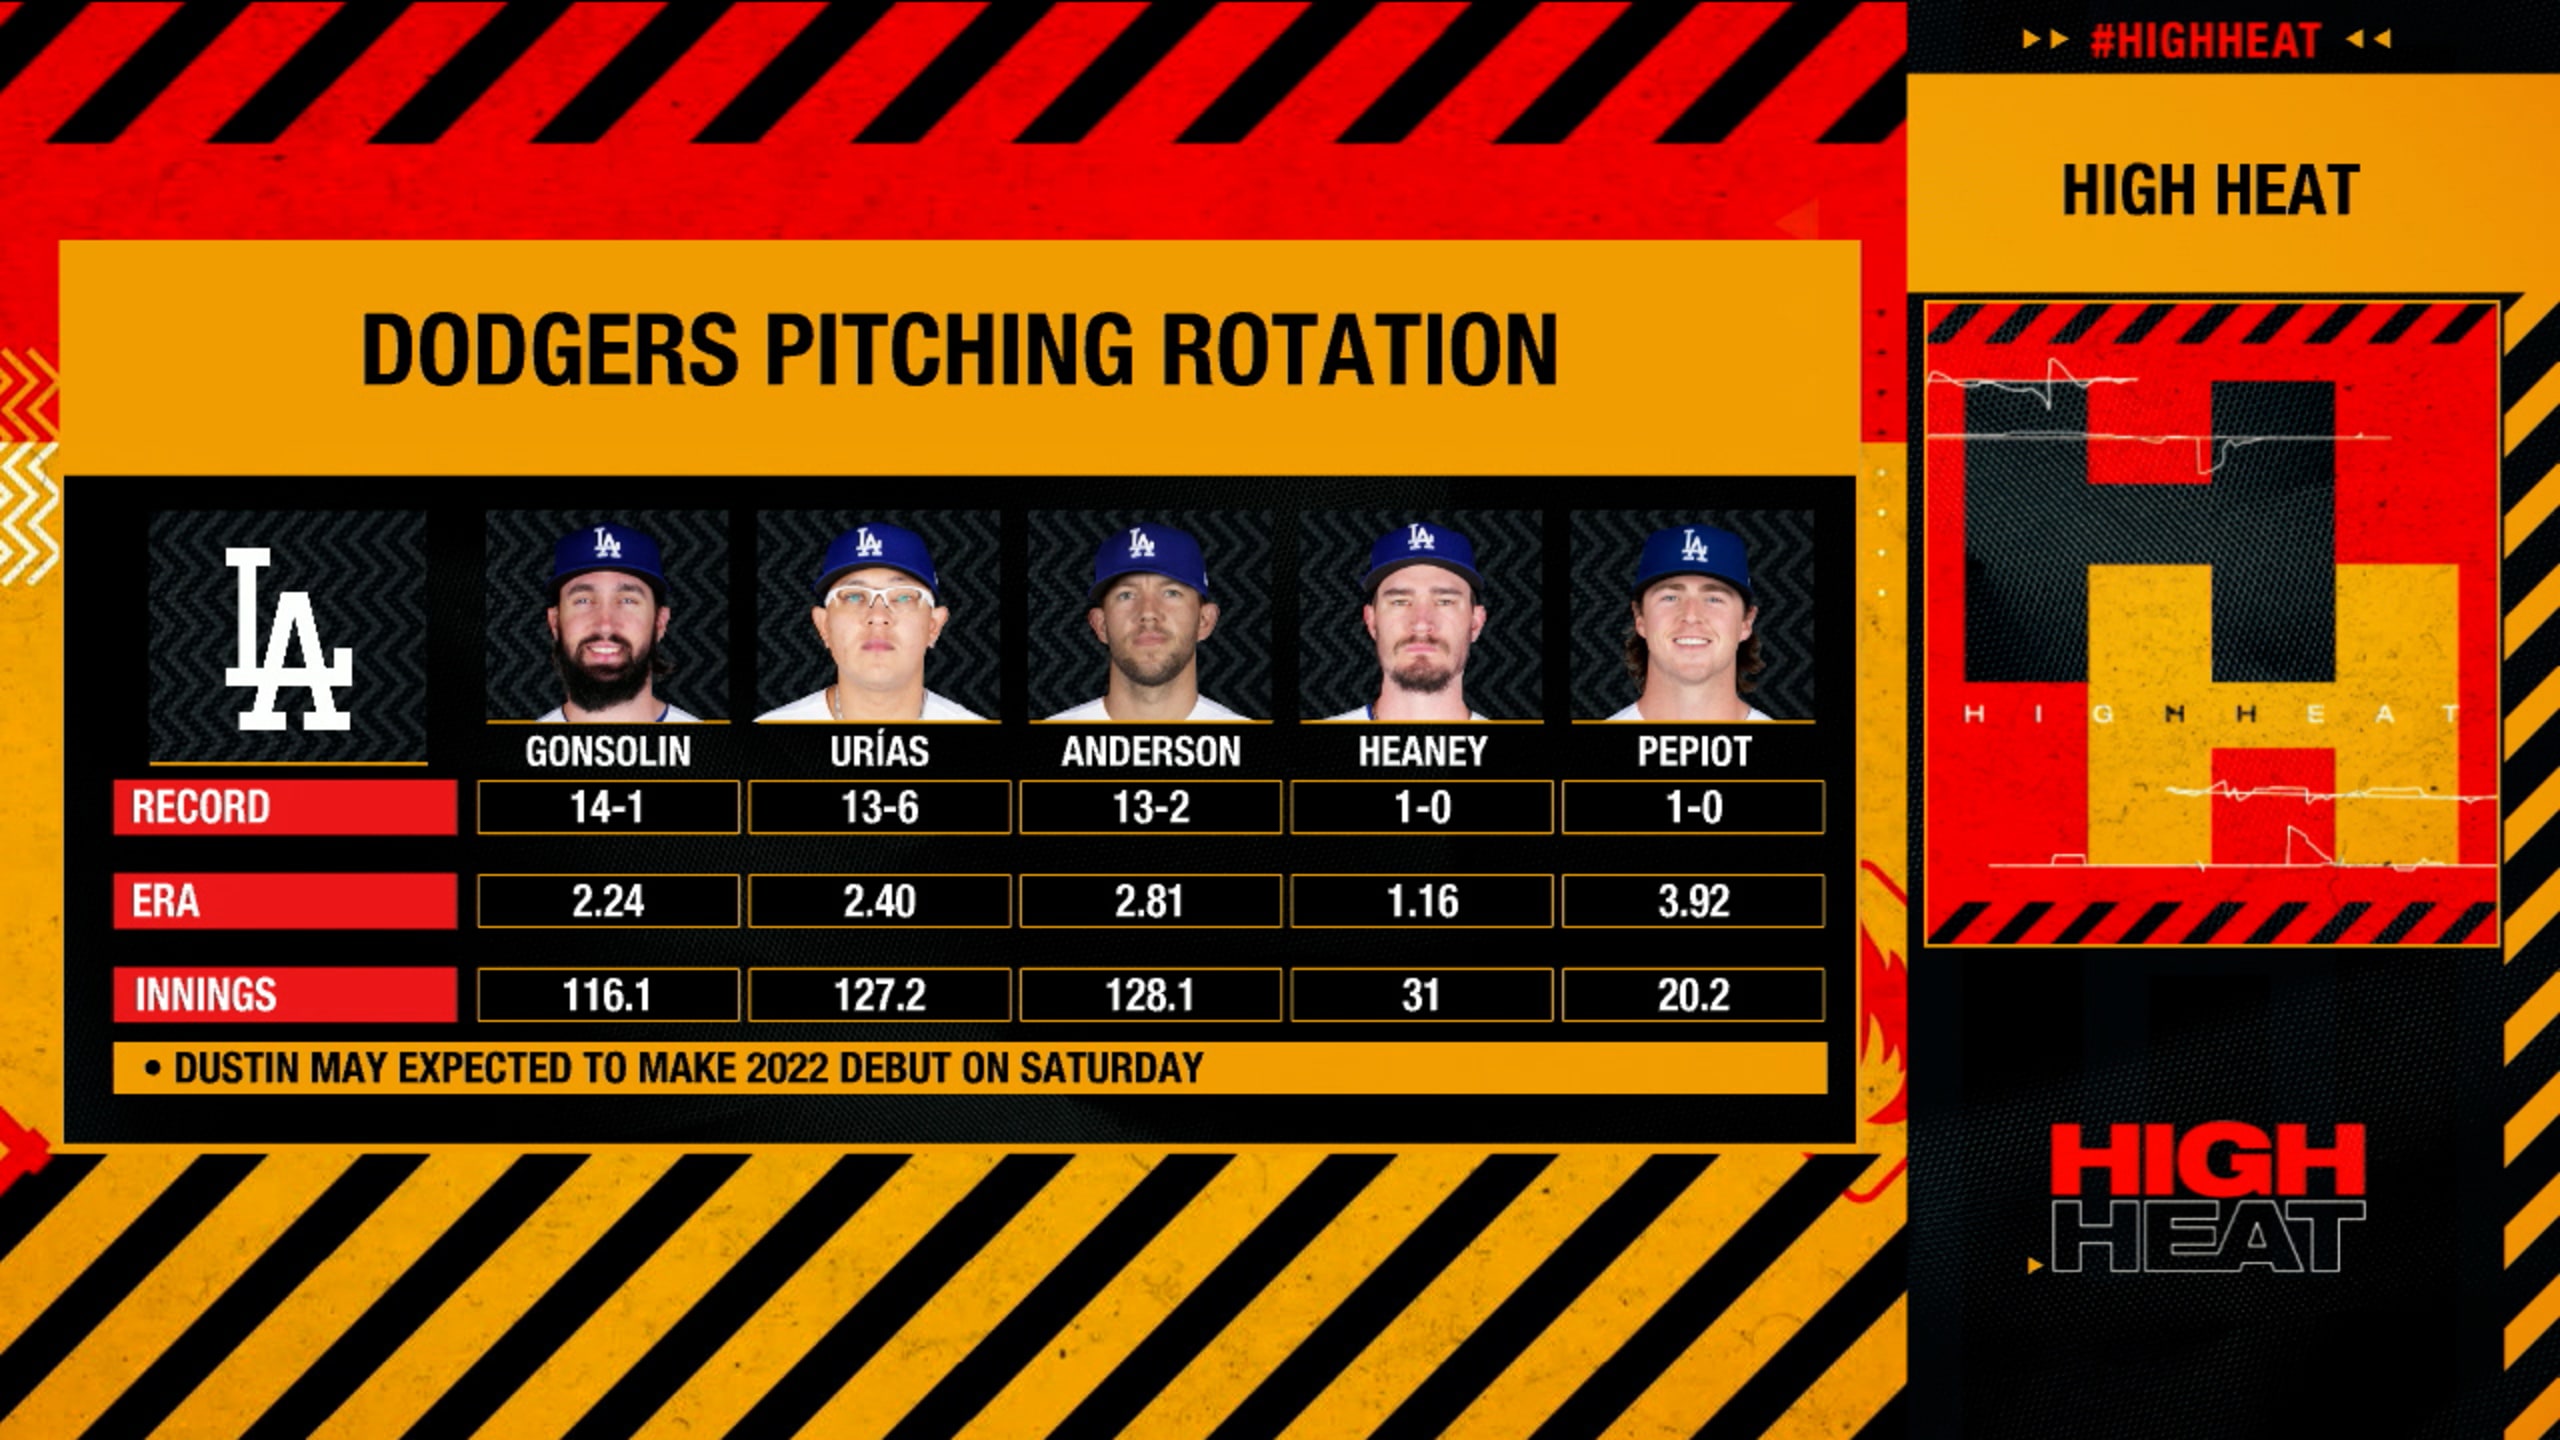 Dodgers pitching rotation